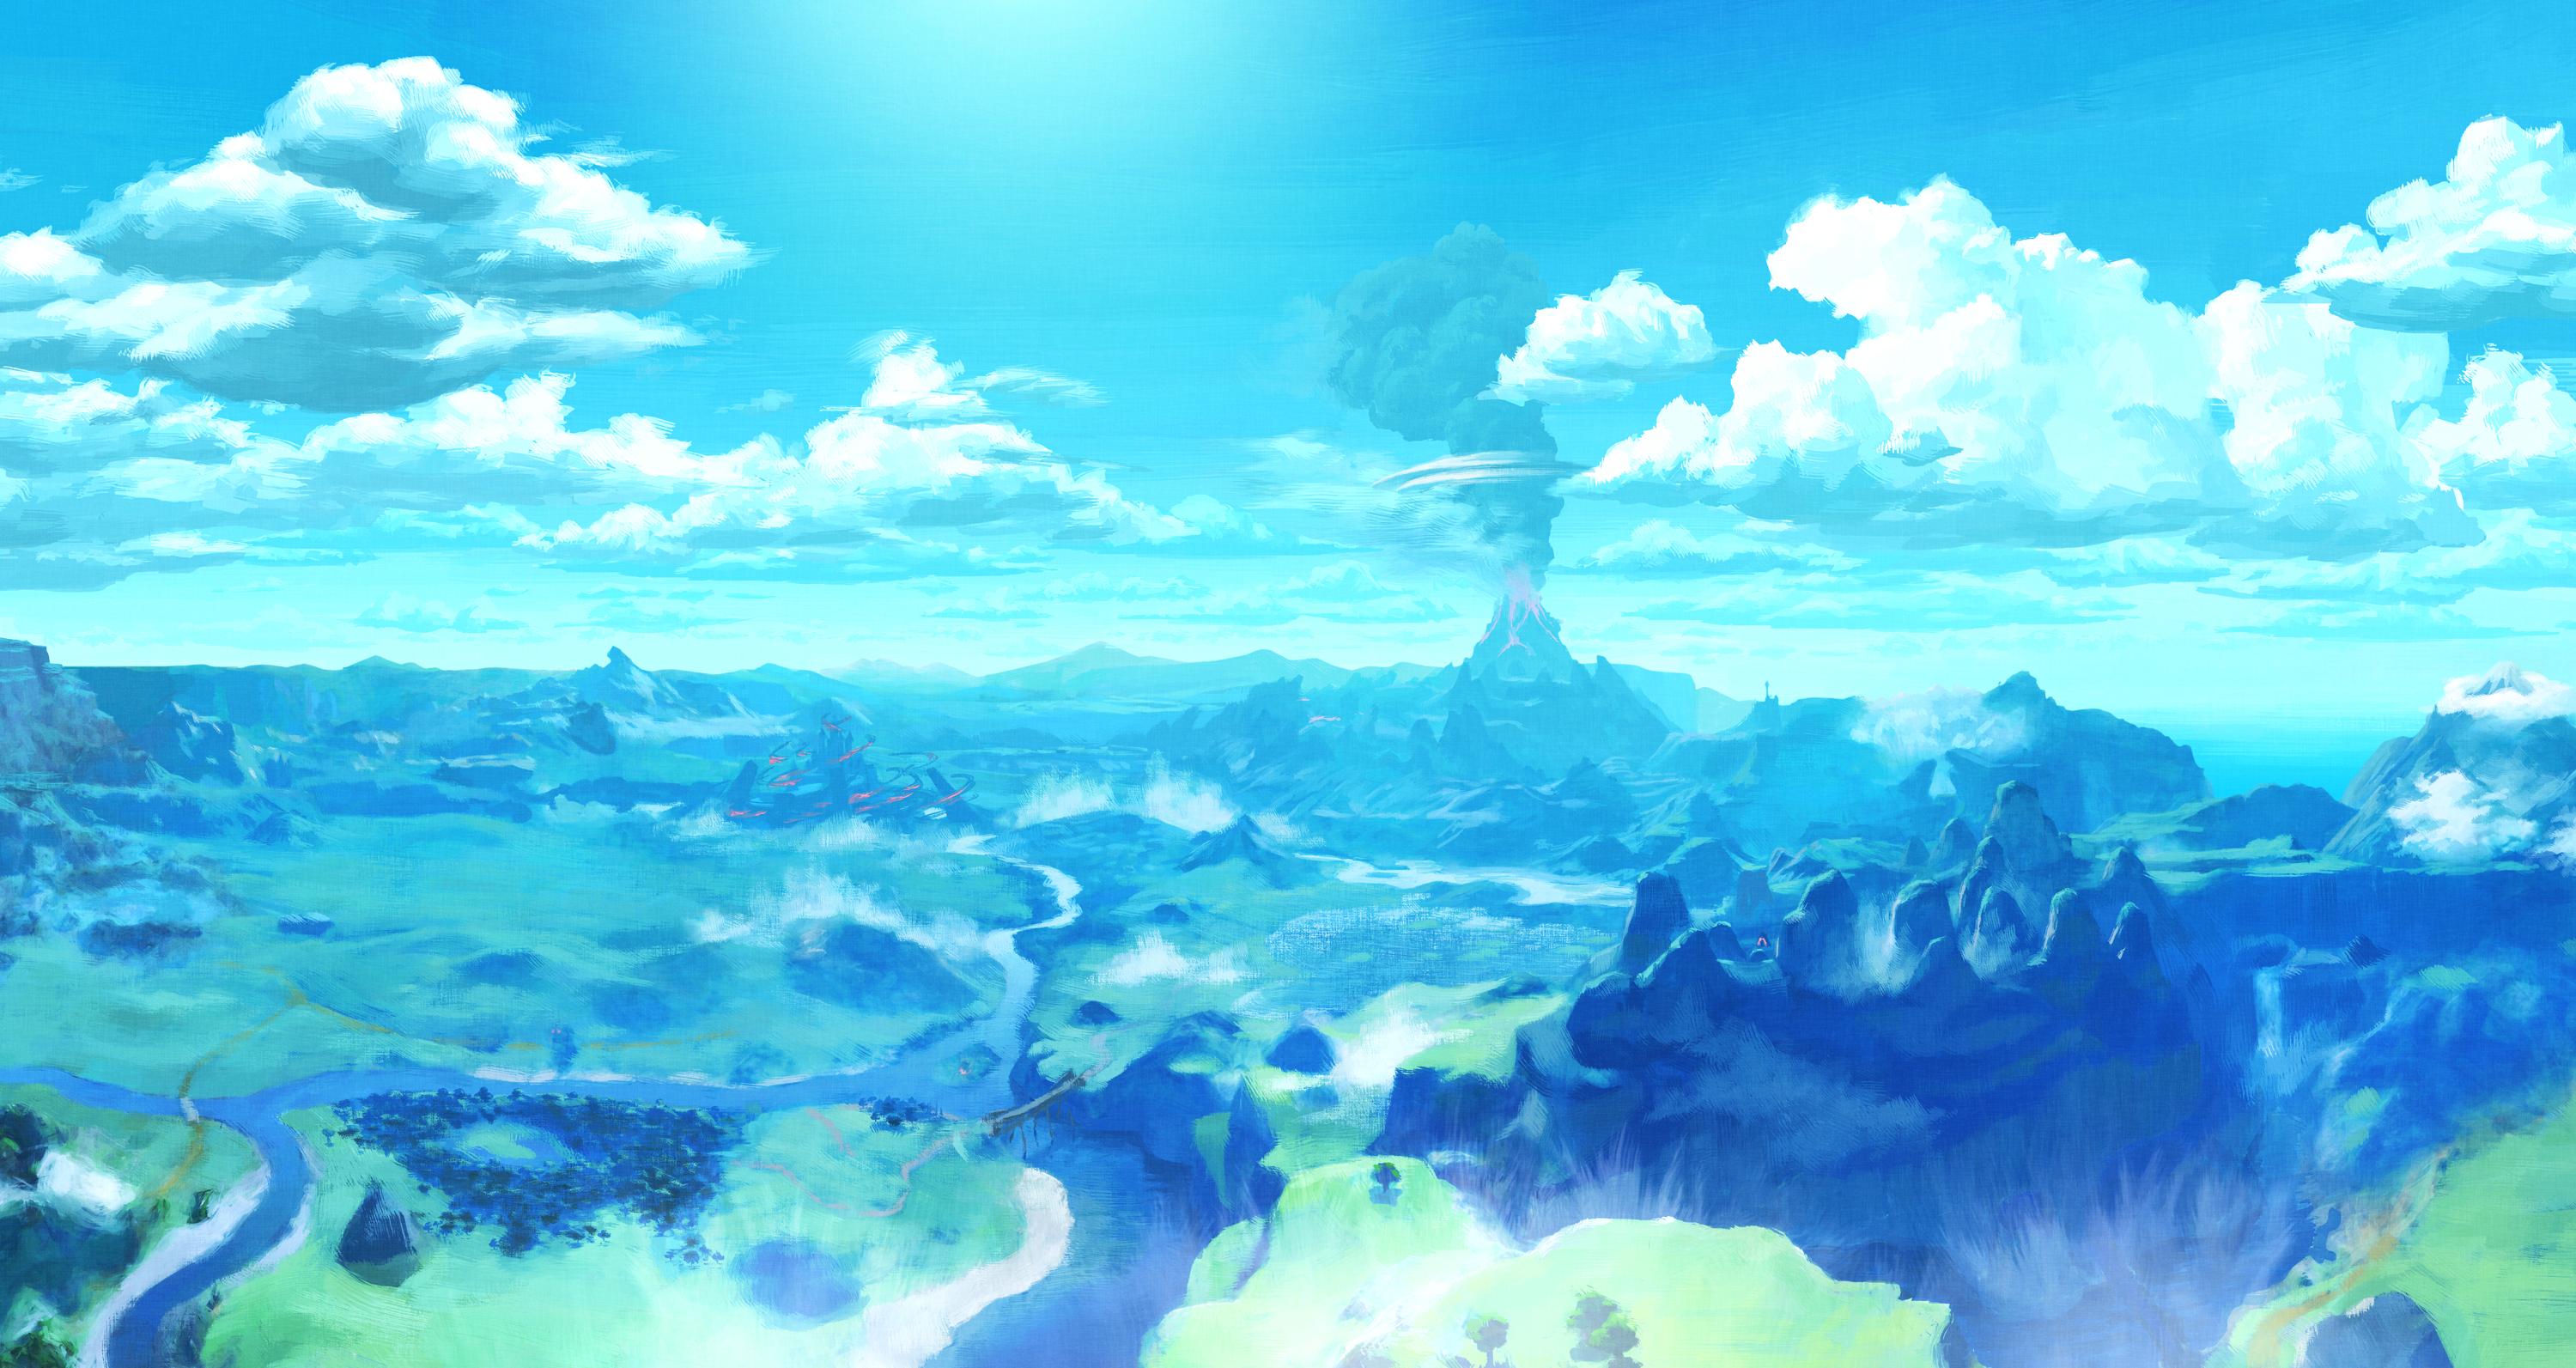 Awesome The Legend Of Zelda - Zelda Breath Of The Wild , HD Wallpaper & Backgrounds